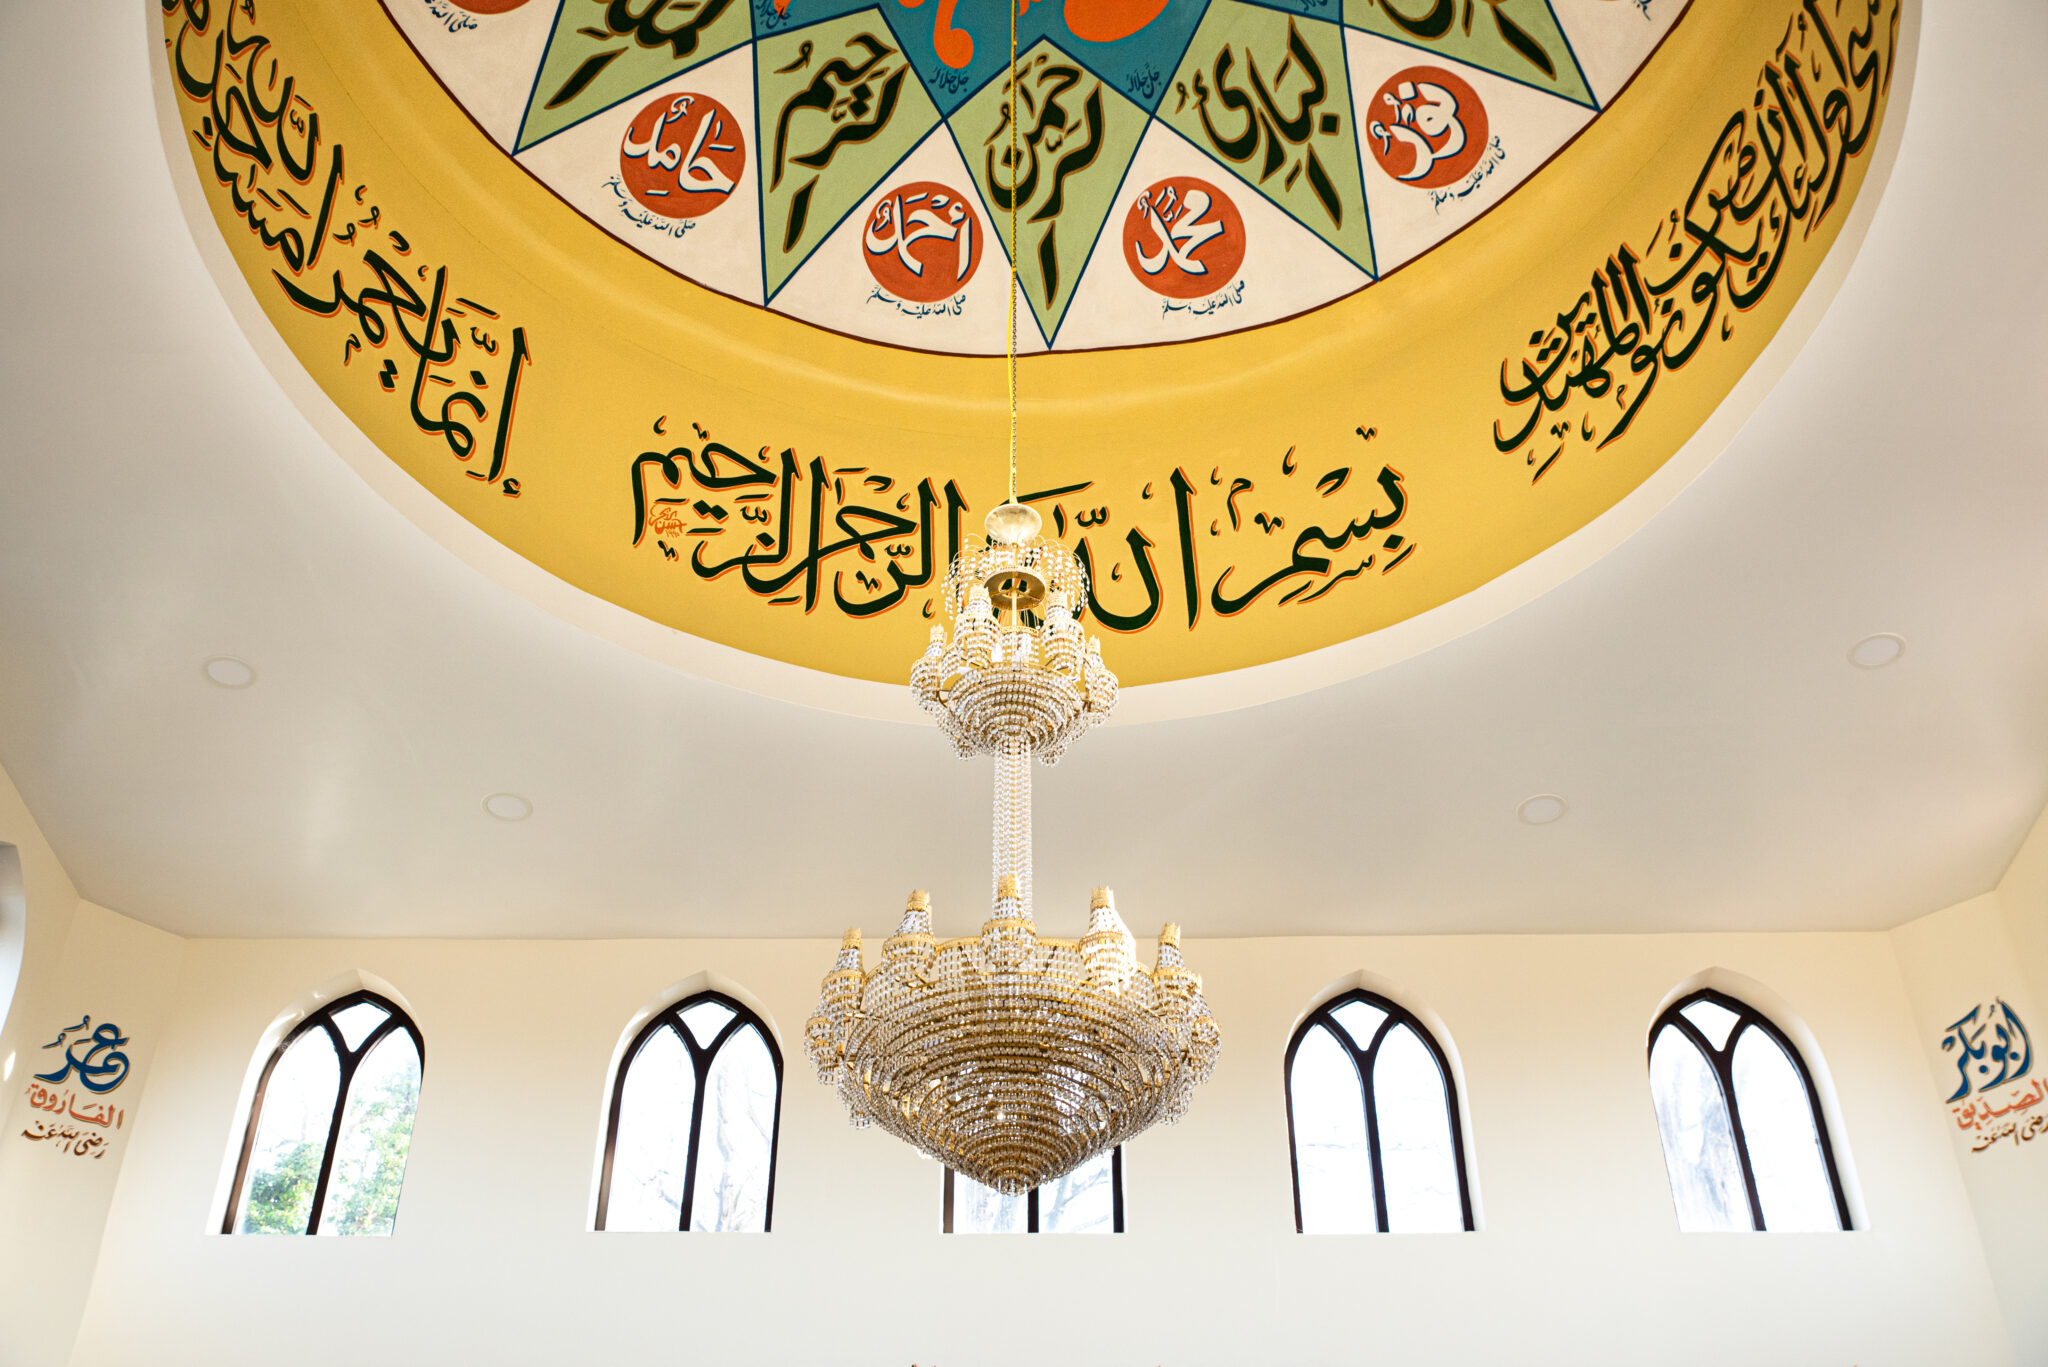 Islamic Art Calligraphy in Aylesbury Mosque and Islamic Centre